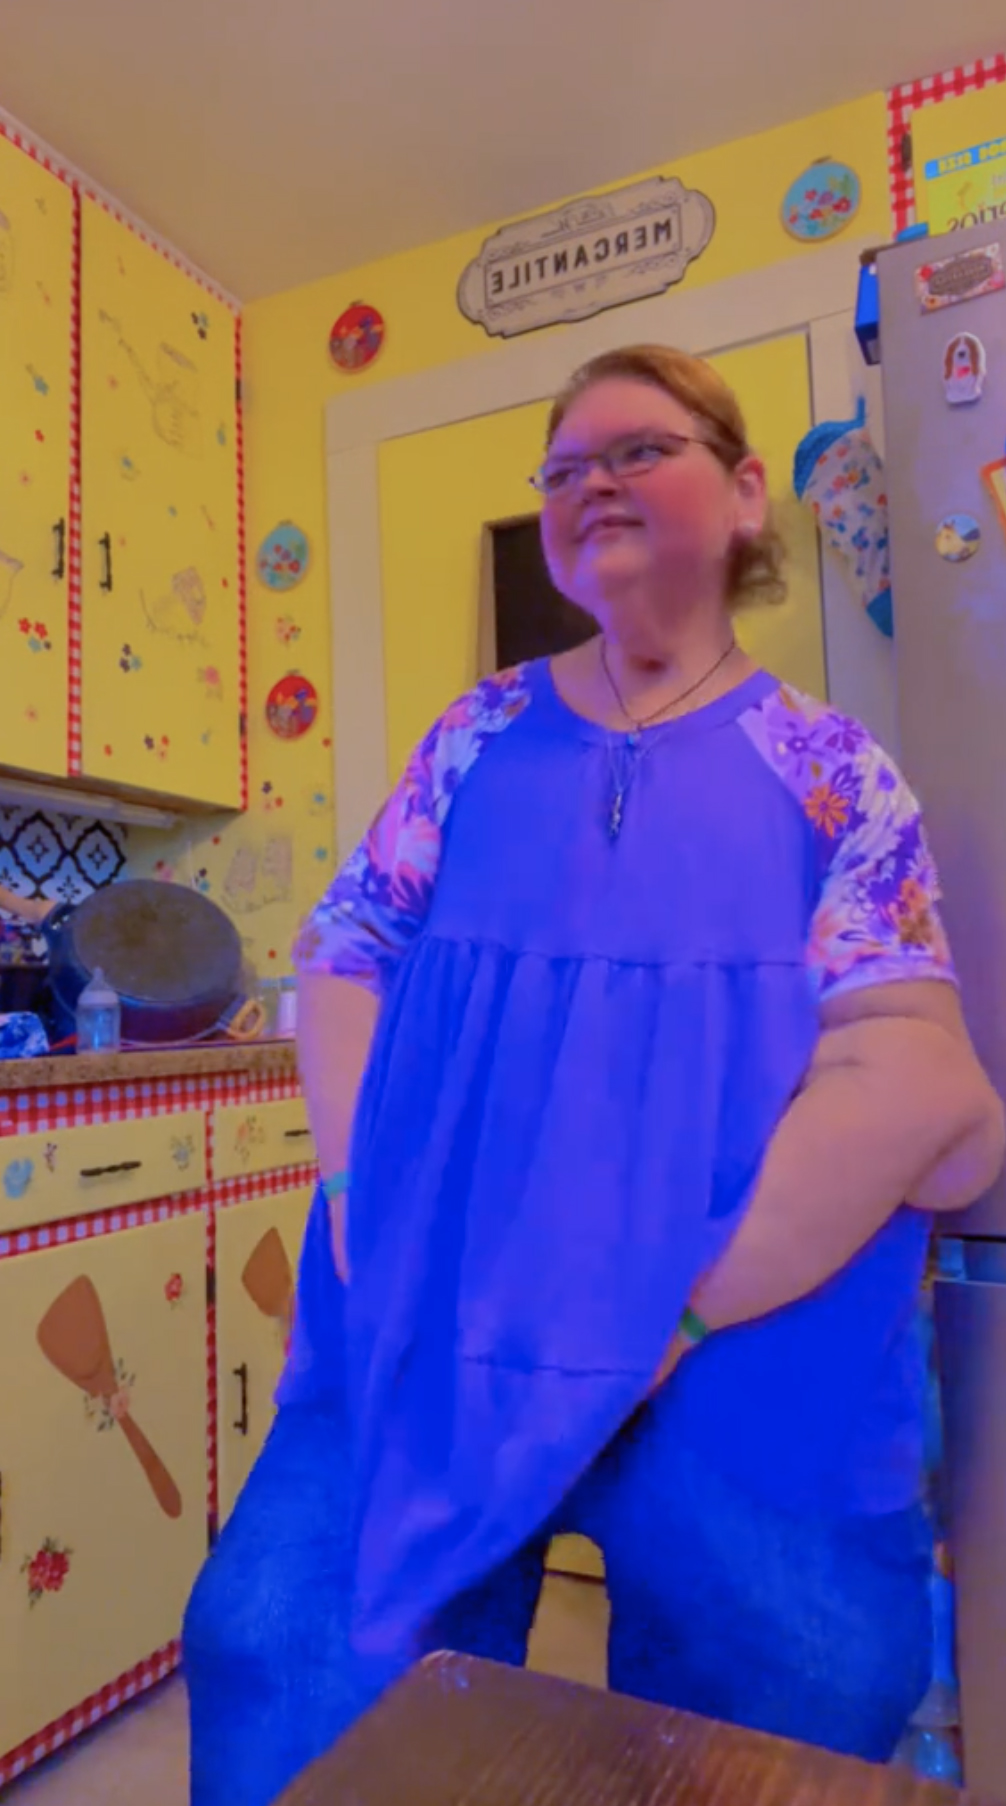 Tammy's clip showed her in a blue sundress that spotlighted her weight loss